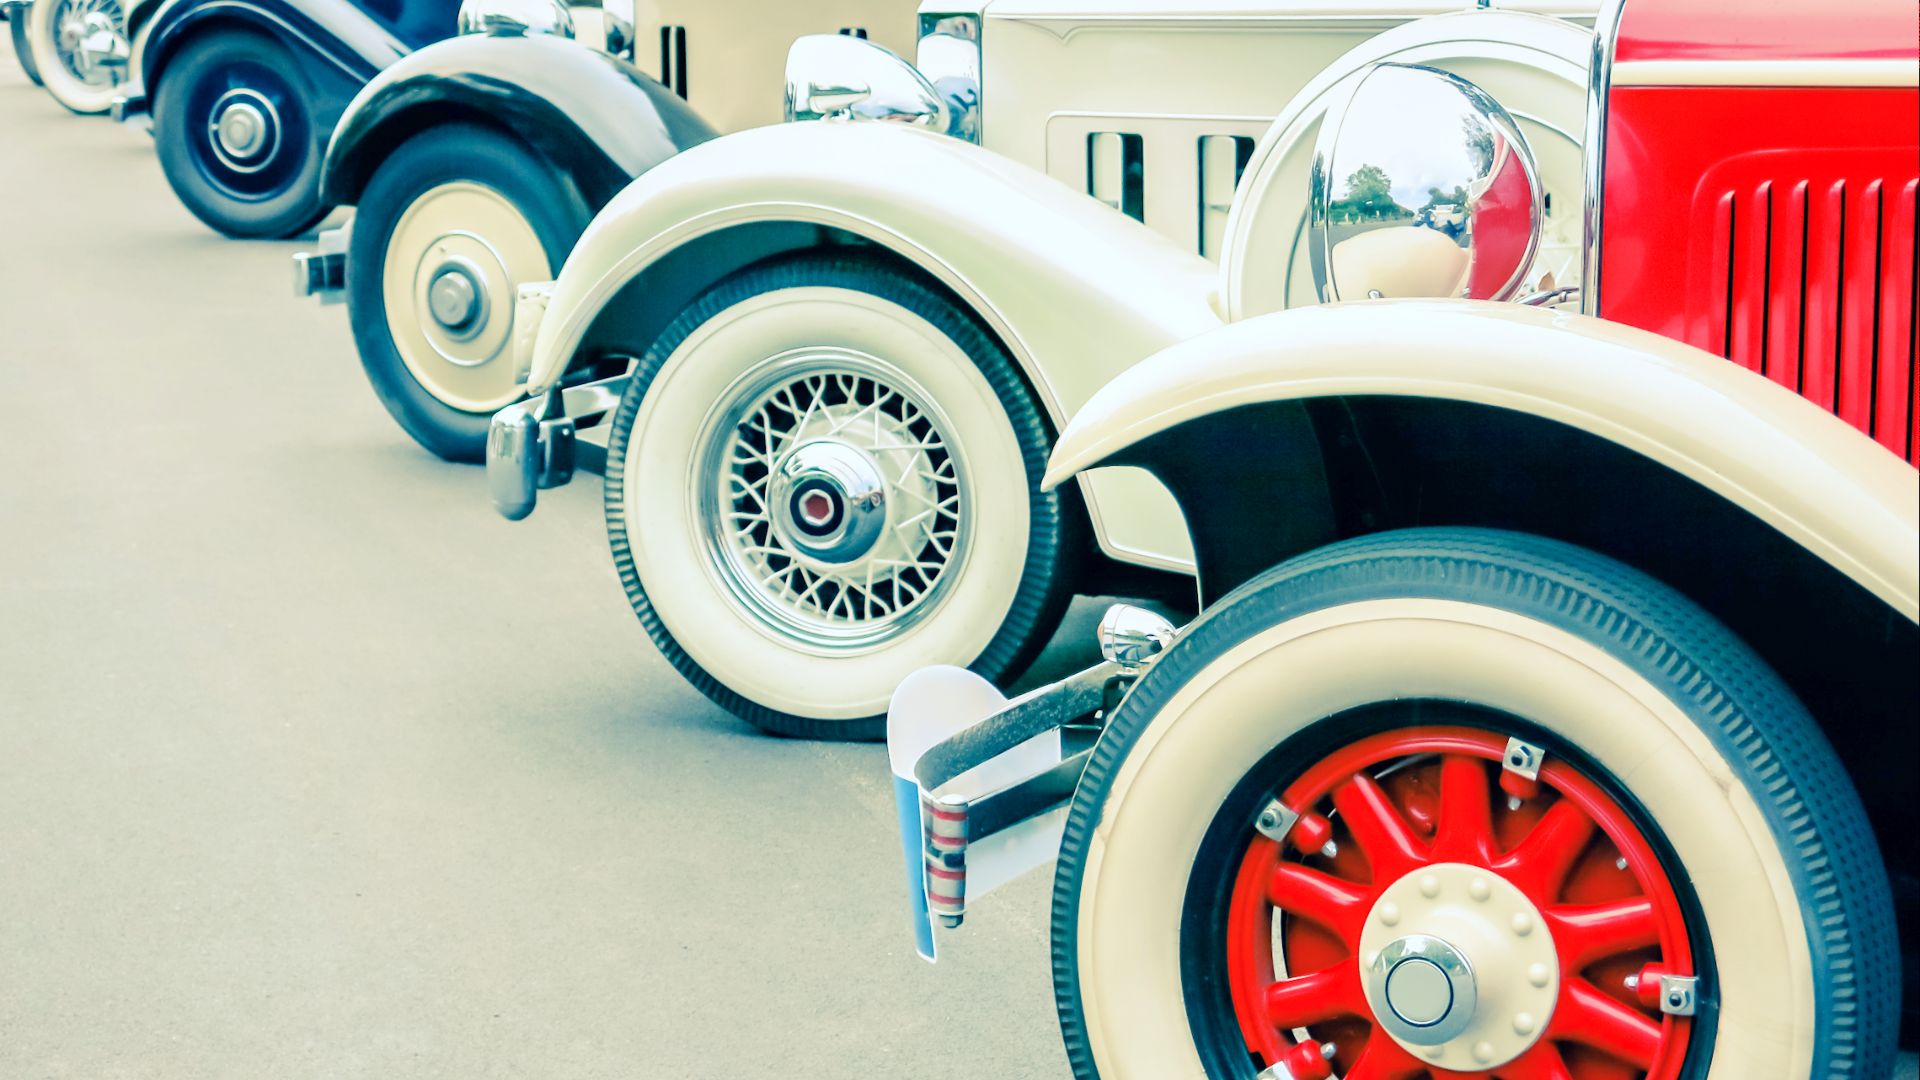 The Amelia Island Concours d’Elegance has been acquired by Hagerty Events